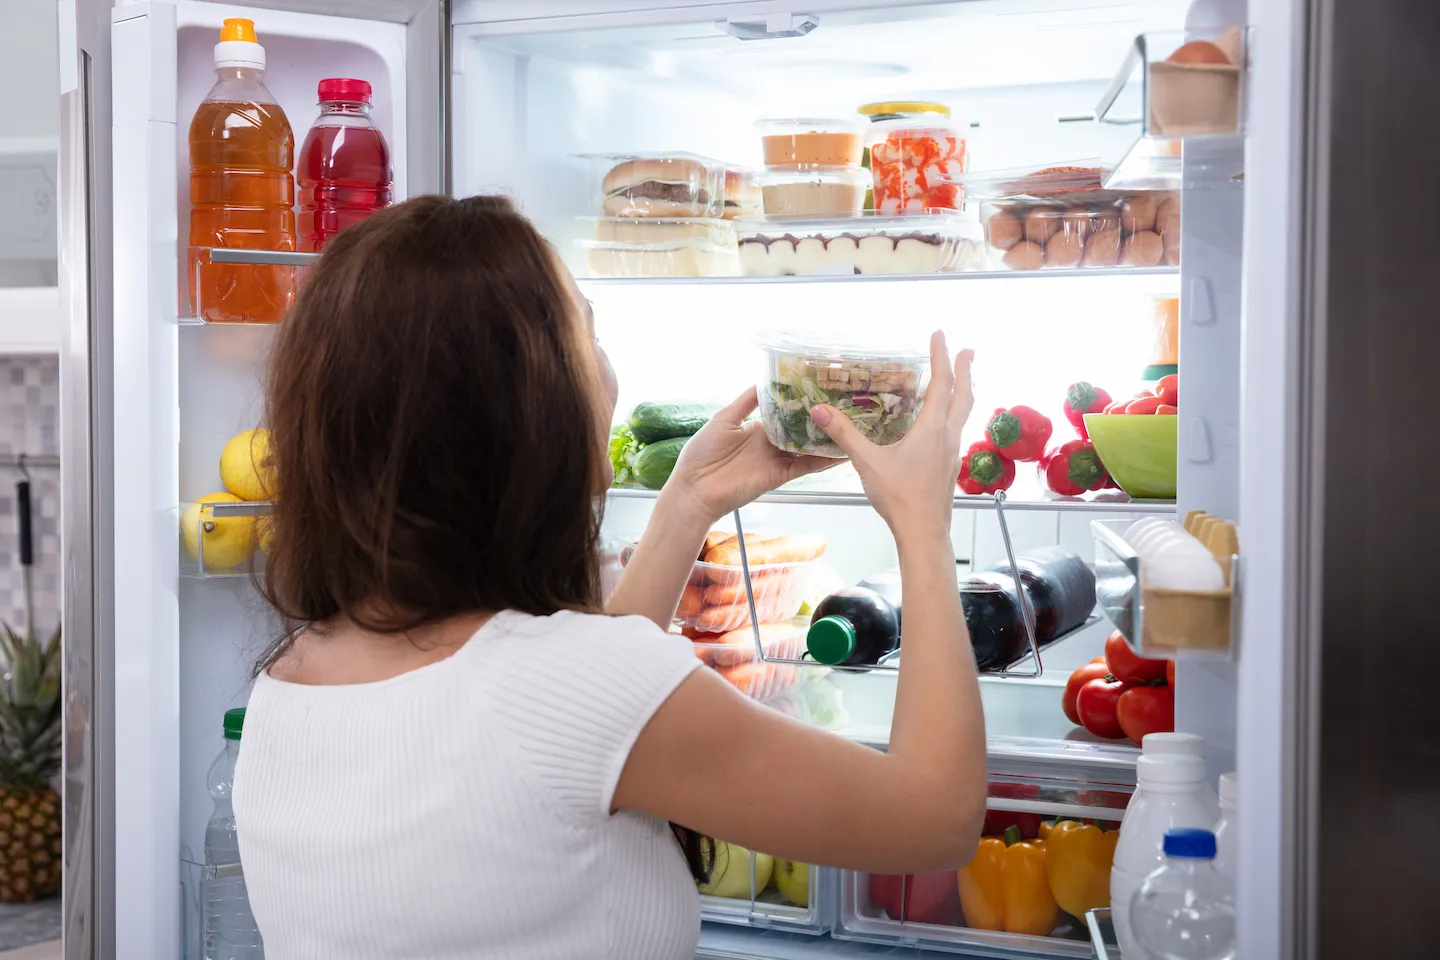 What foods cannot be stored in the refrigerator?